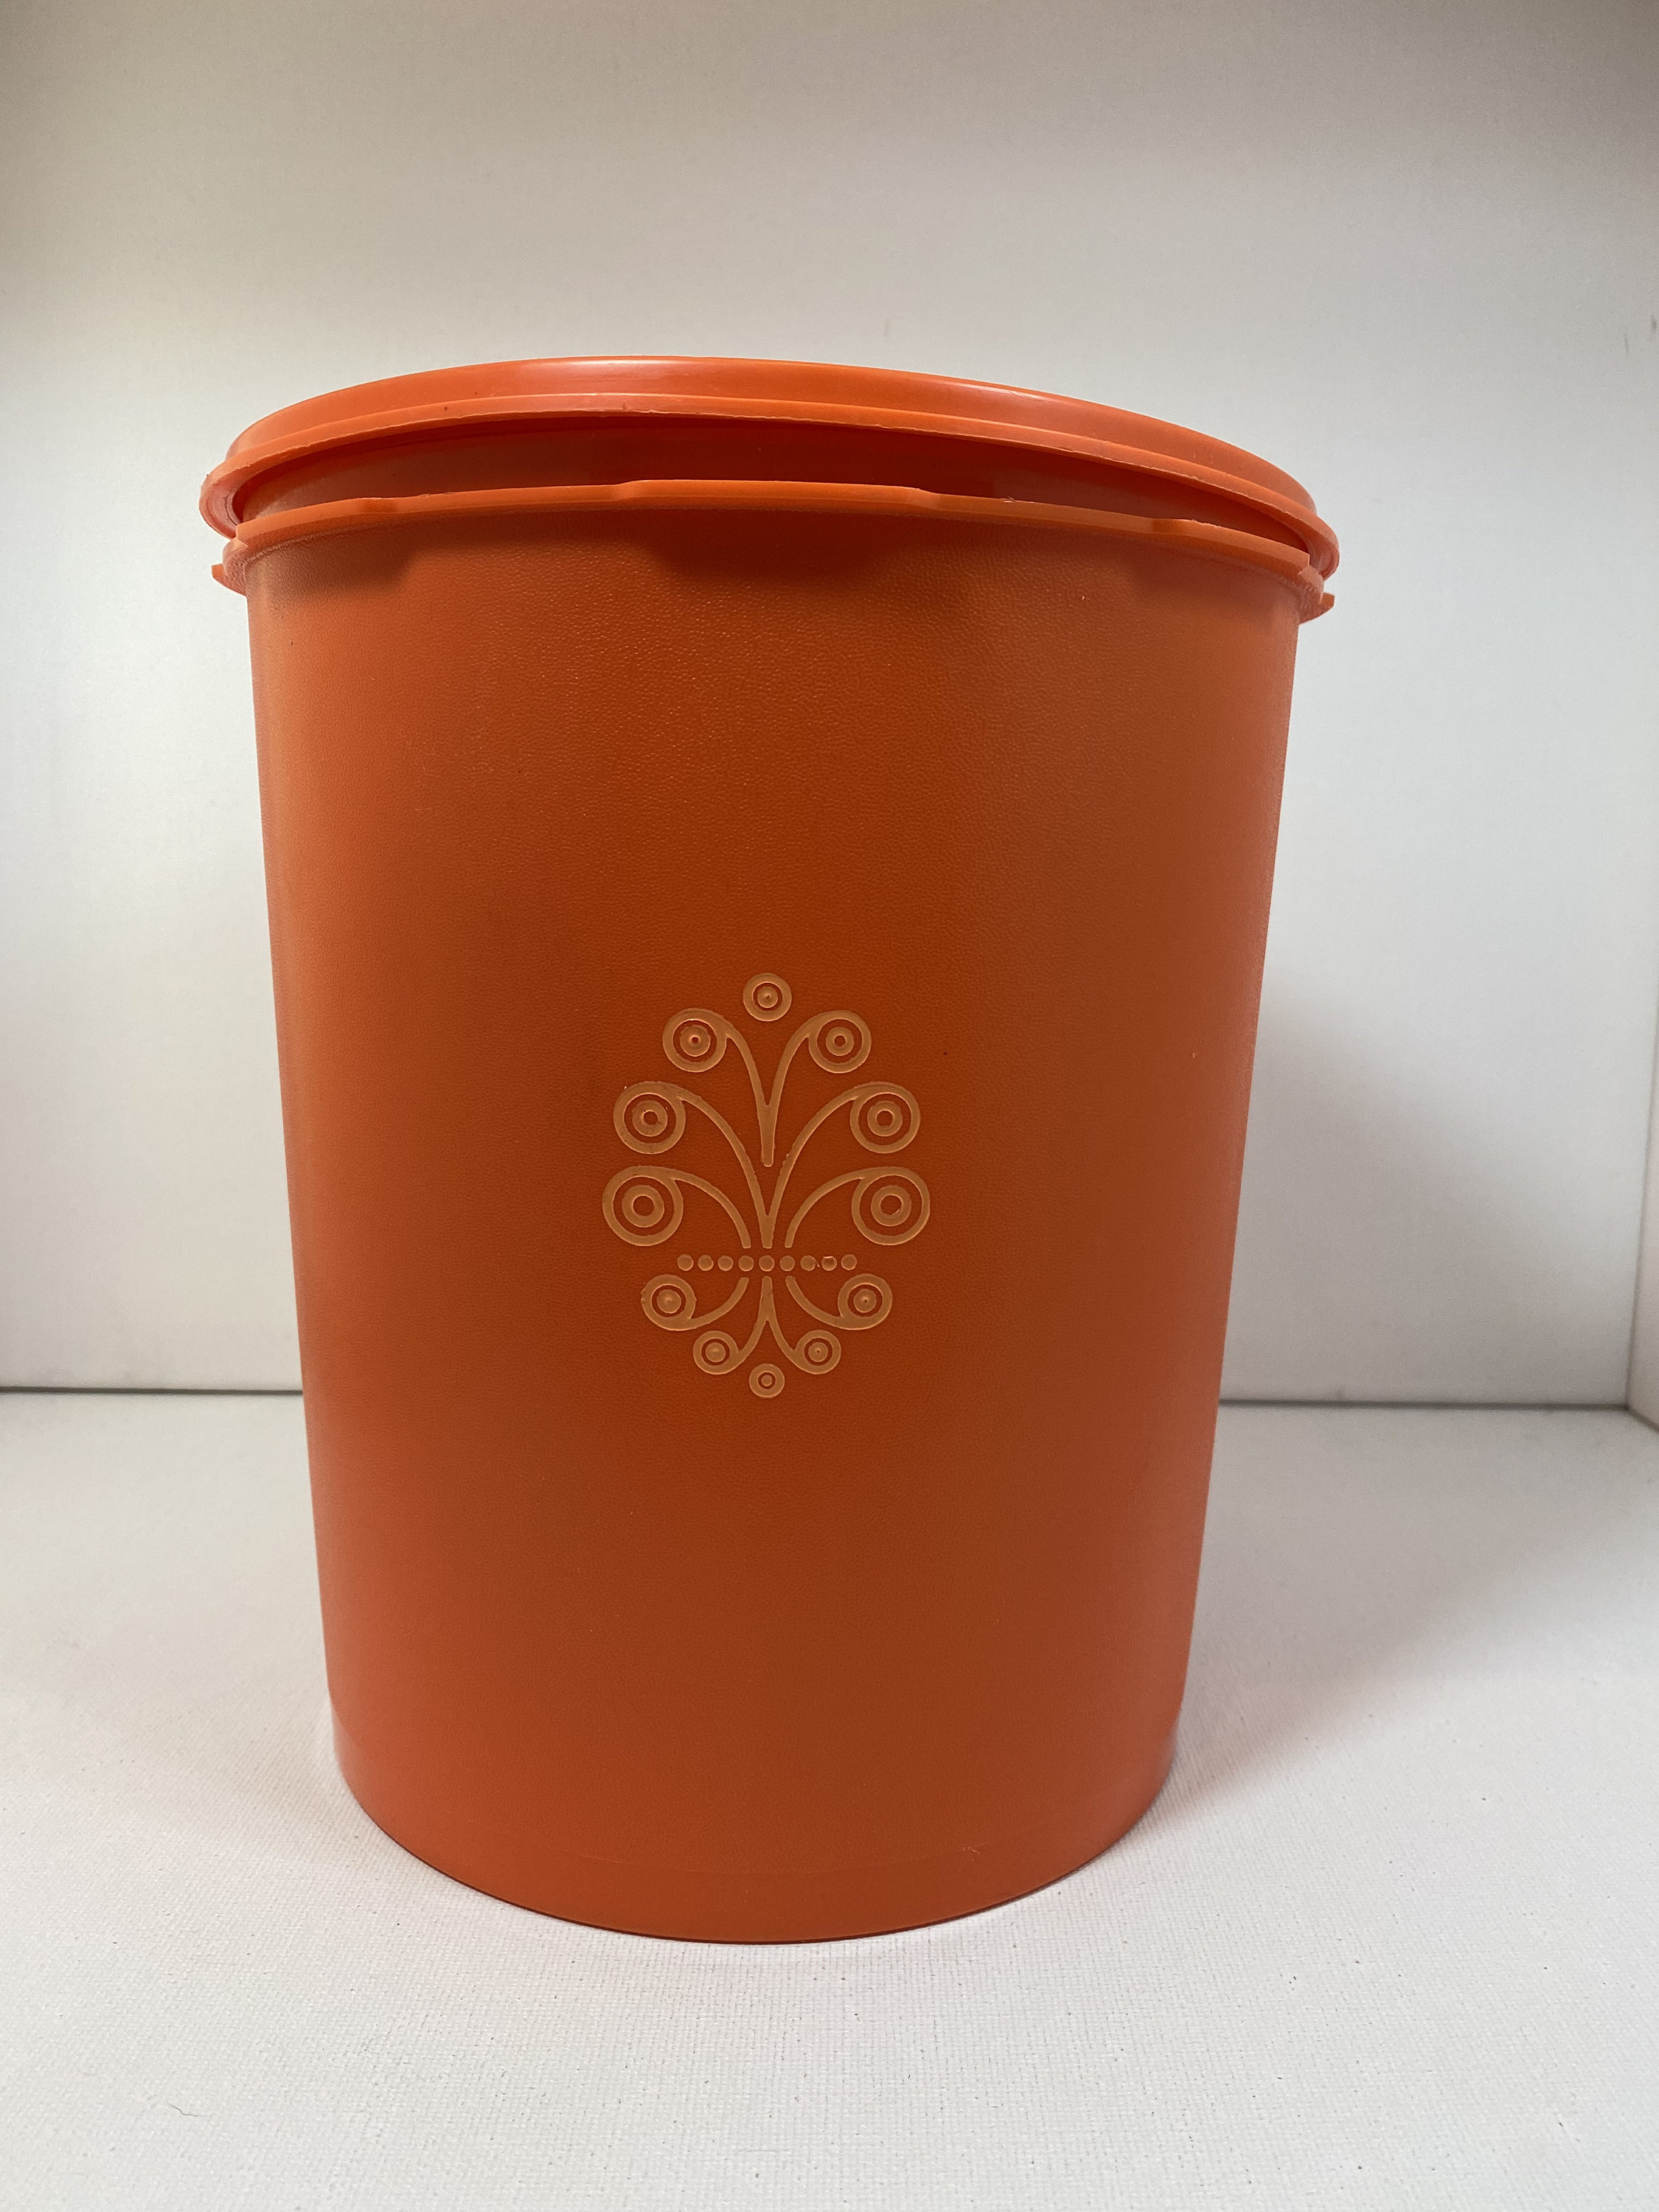 Tupperware Lidded Canister Container XL Multi Coloured Groovy Flowers Red  Green Yellow 5.50 L Made in Mexico 5624A-2 Extra Large Storage 